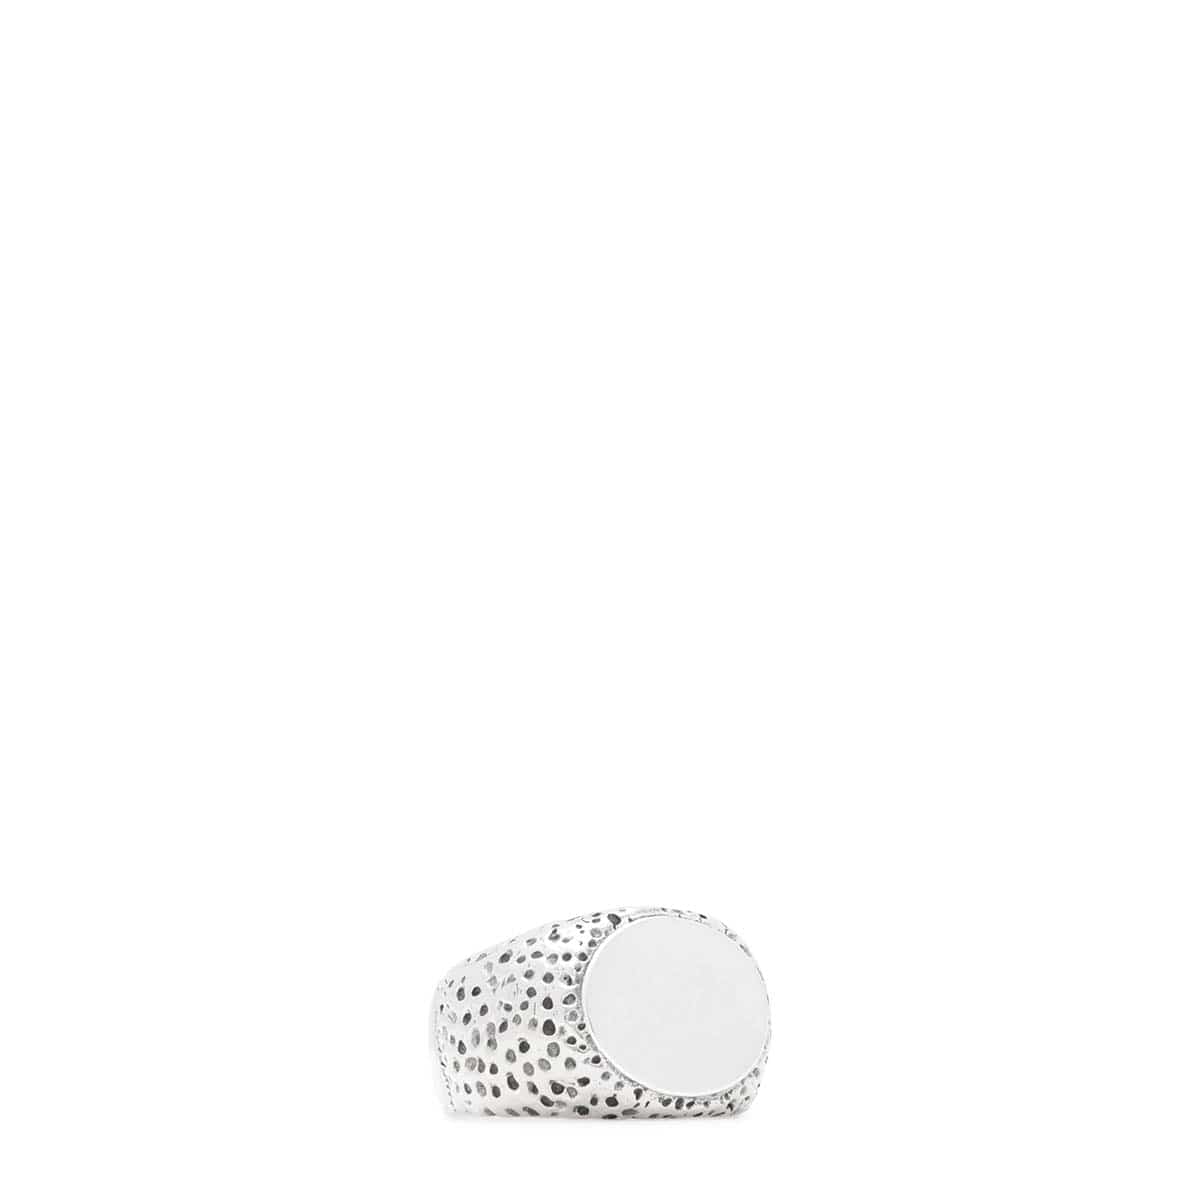 NUGGET RING SILVER 925 | GmarShops